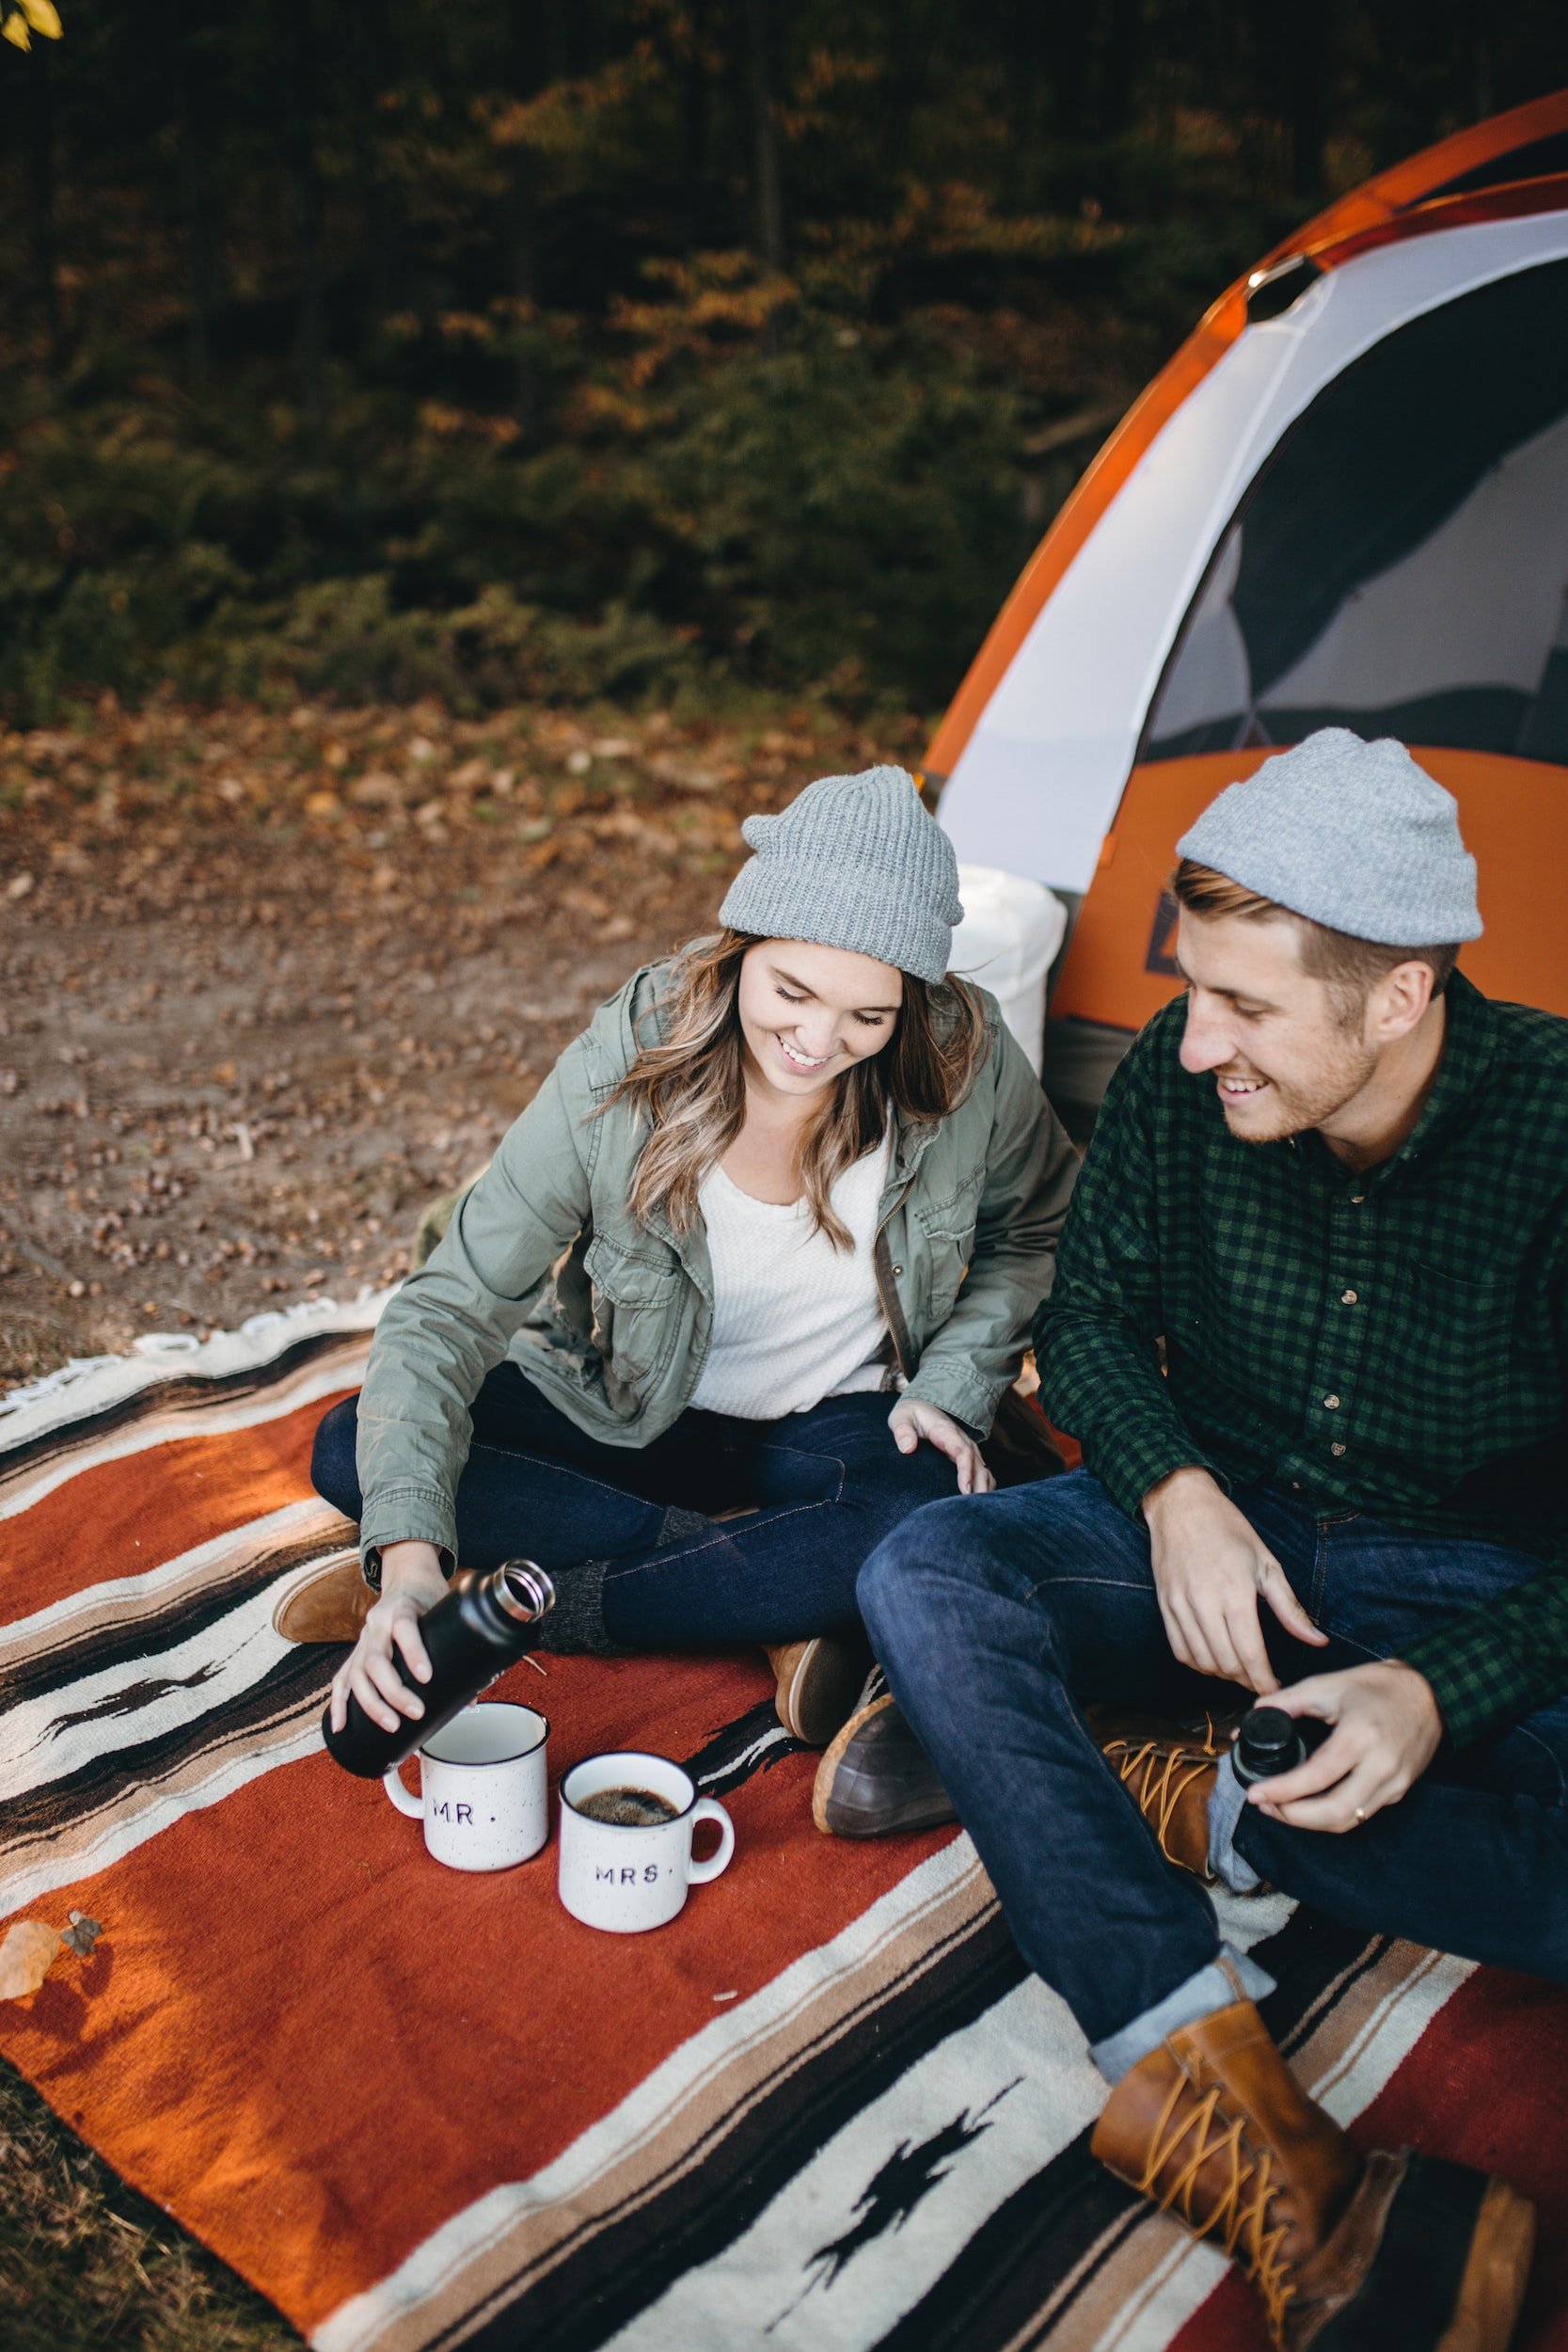 Our Favorite Ways to Make Coffee While Camping